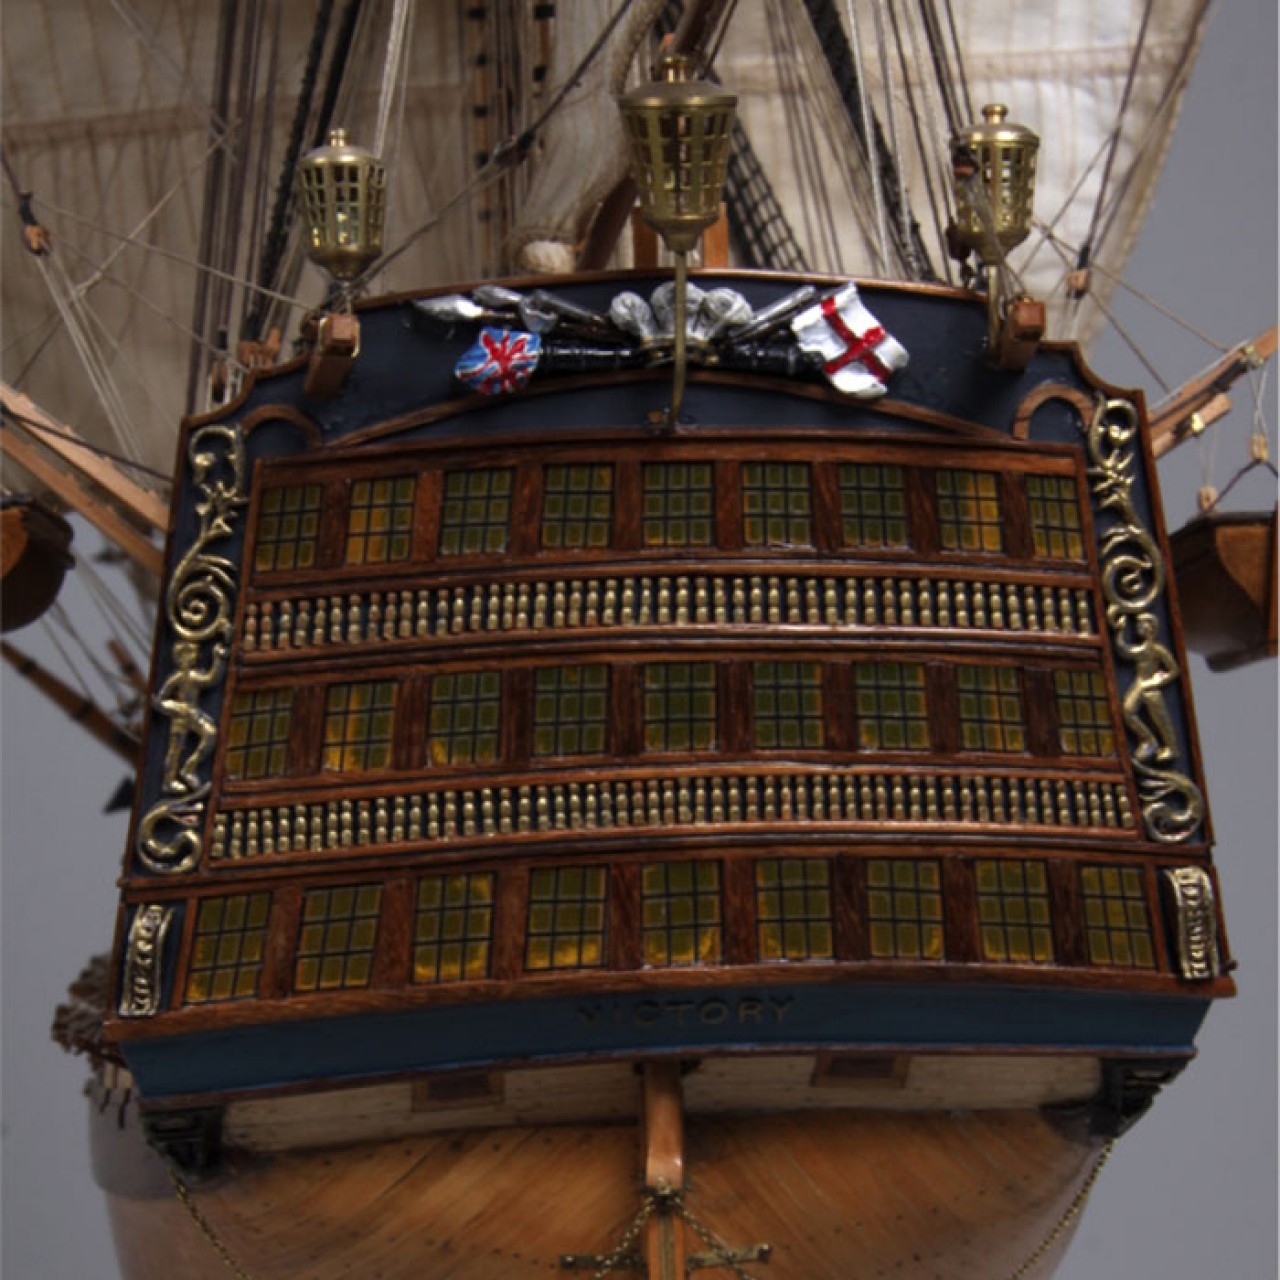 HMS Victory Model Sailing Ship 1:84 Scale | ModelSpace